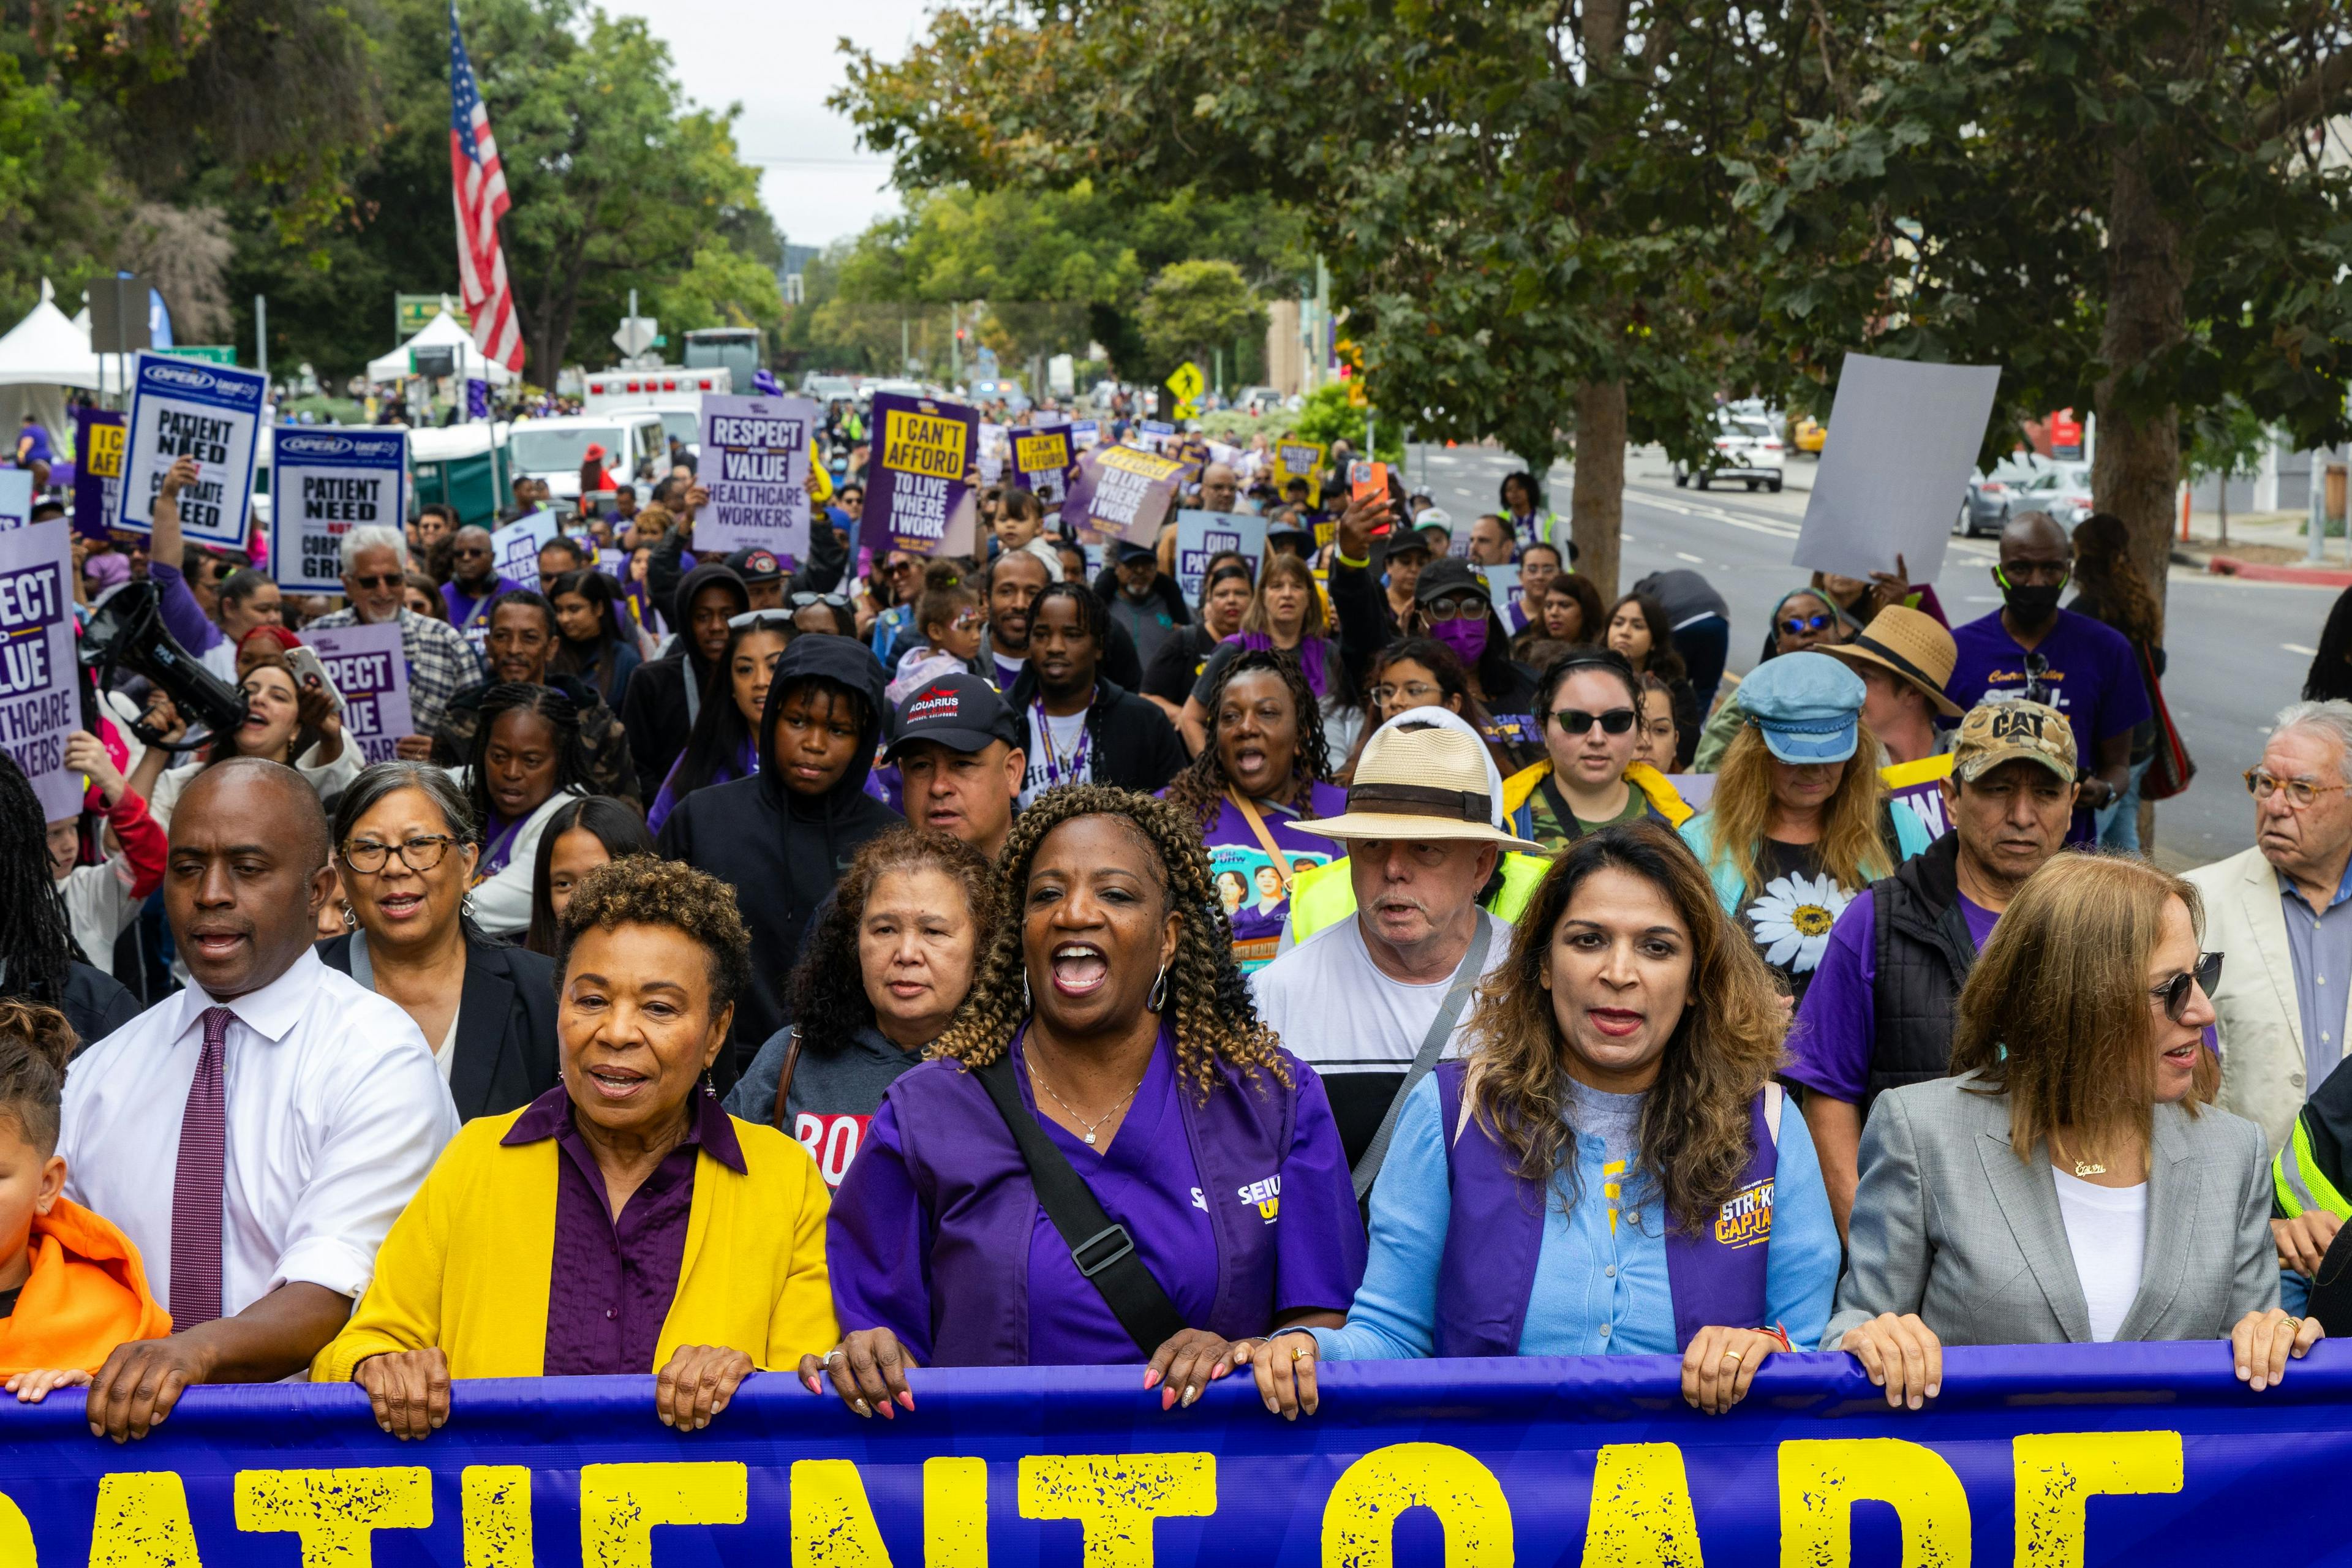 Kaiser Permanente union workers have signed off on a four-year contract that includes 21% raises, sets minimum wages and offers provisions to improve staffing. (Image: SEIU-UHW)